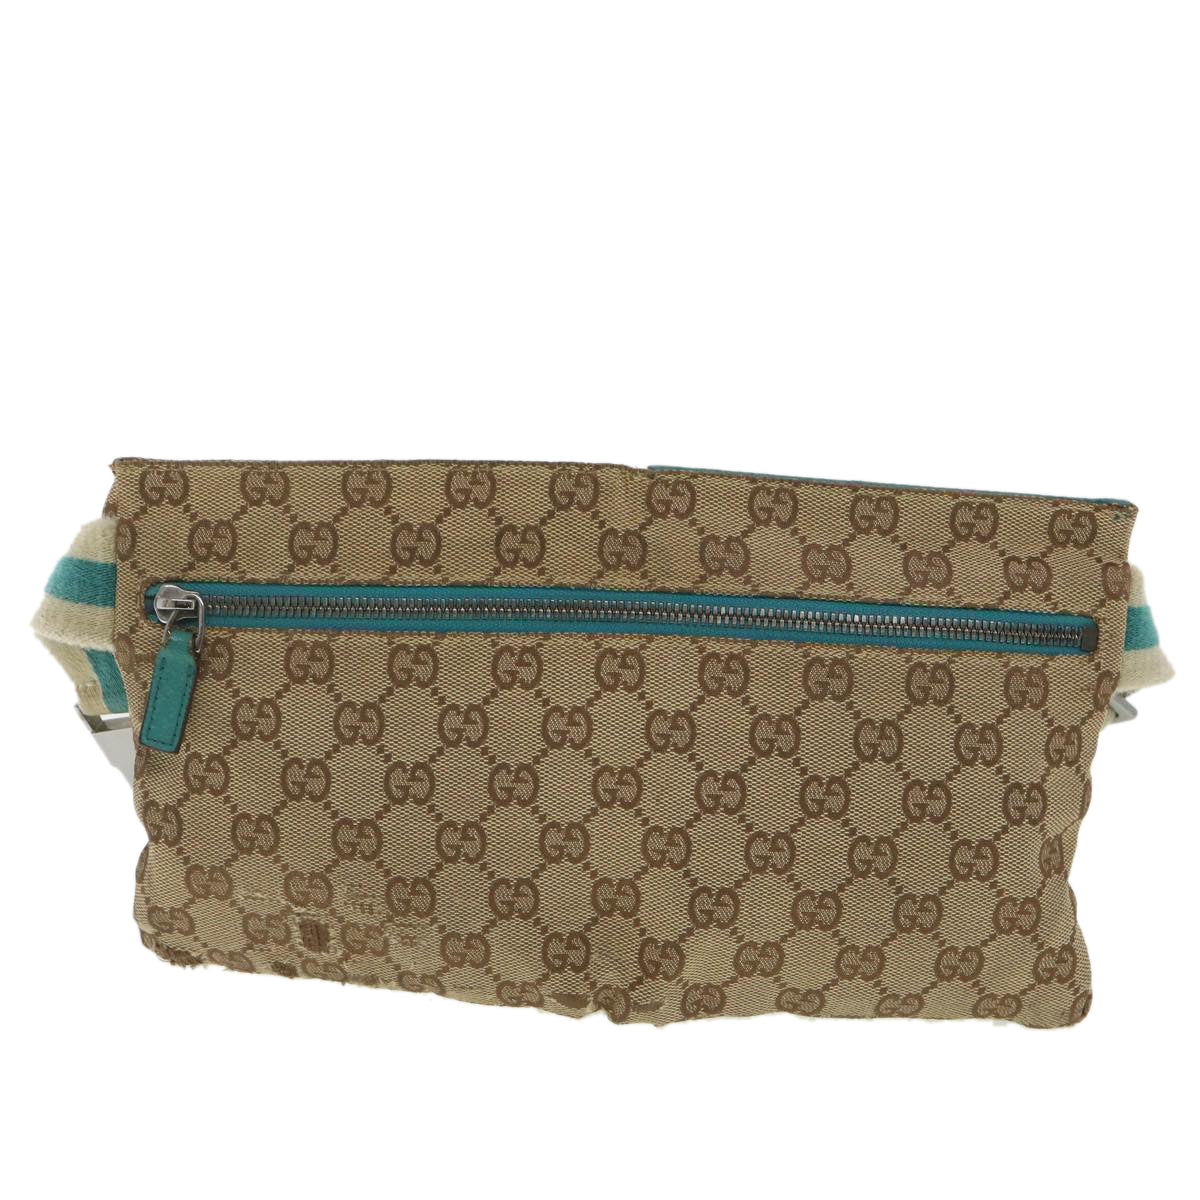 GUCCI Sherry Line GG Canvas Waist Bag Beige Turquoise Blue 28566 Auth rd4355 - 0